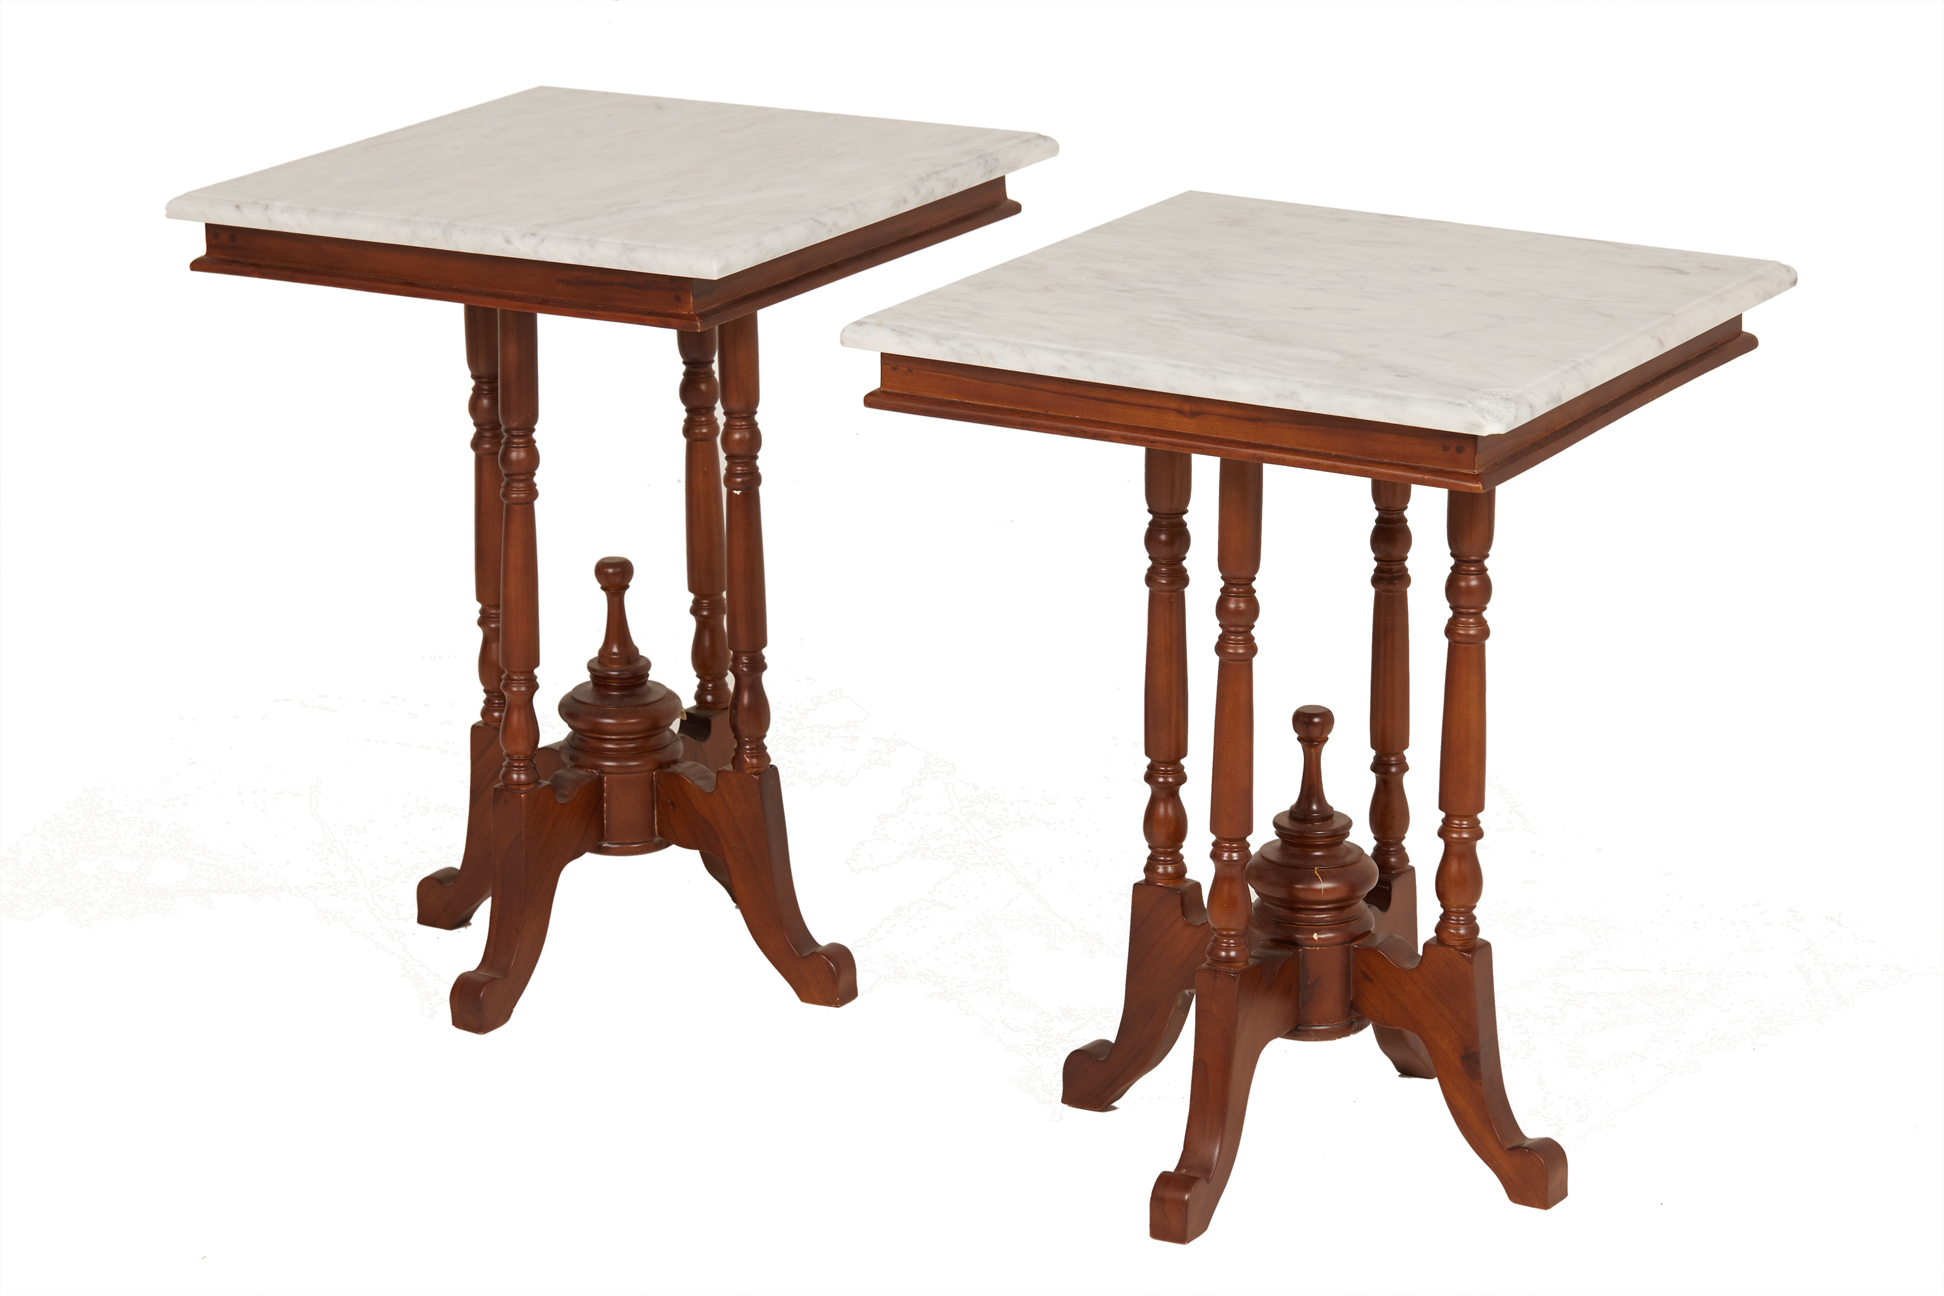 A PAIR OF MARBLE TOPPED SIDE TABLES